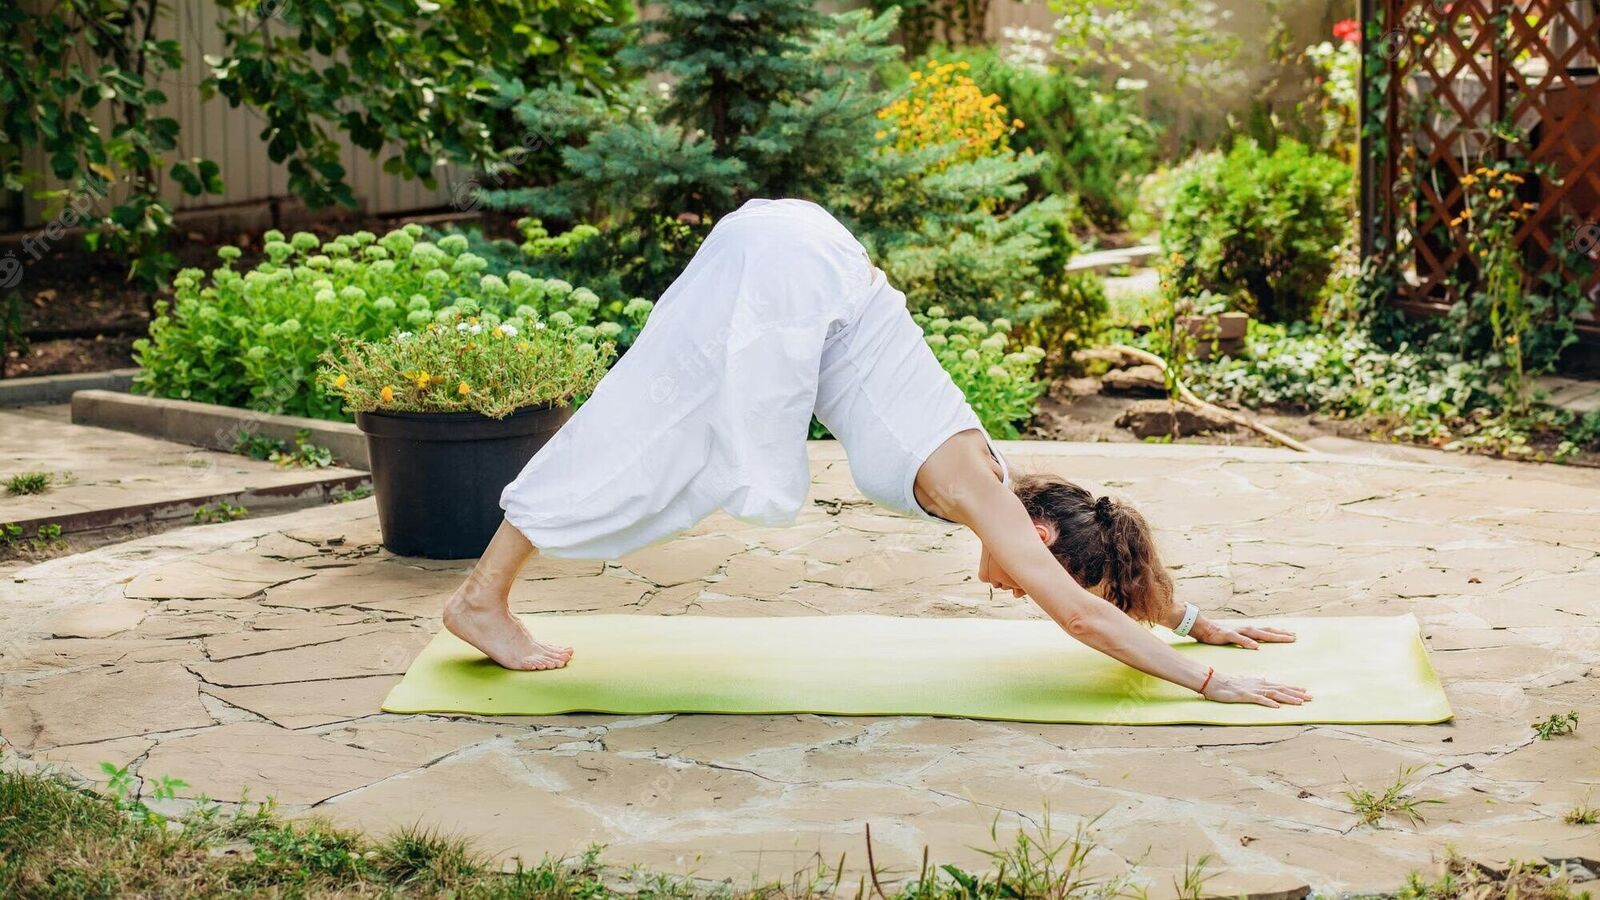 The Ultimate Guide on How to Get Better at Yoga